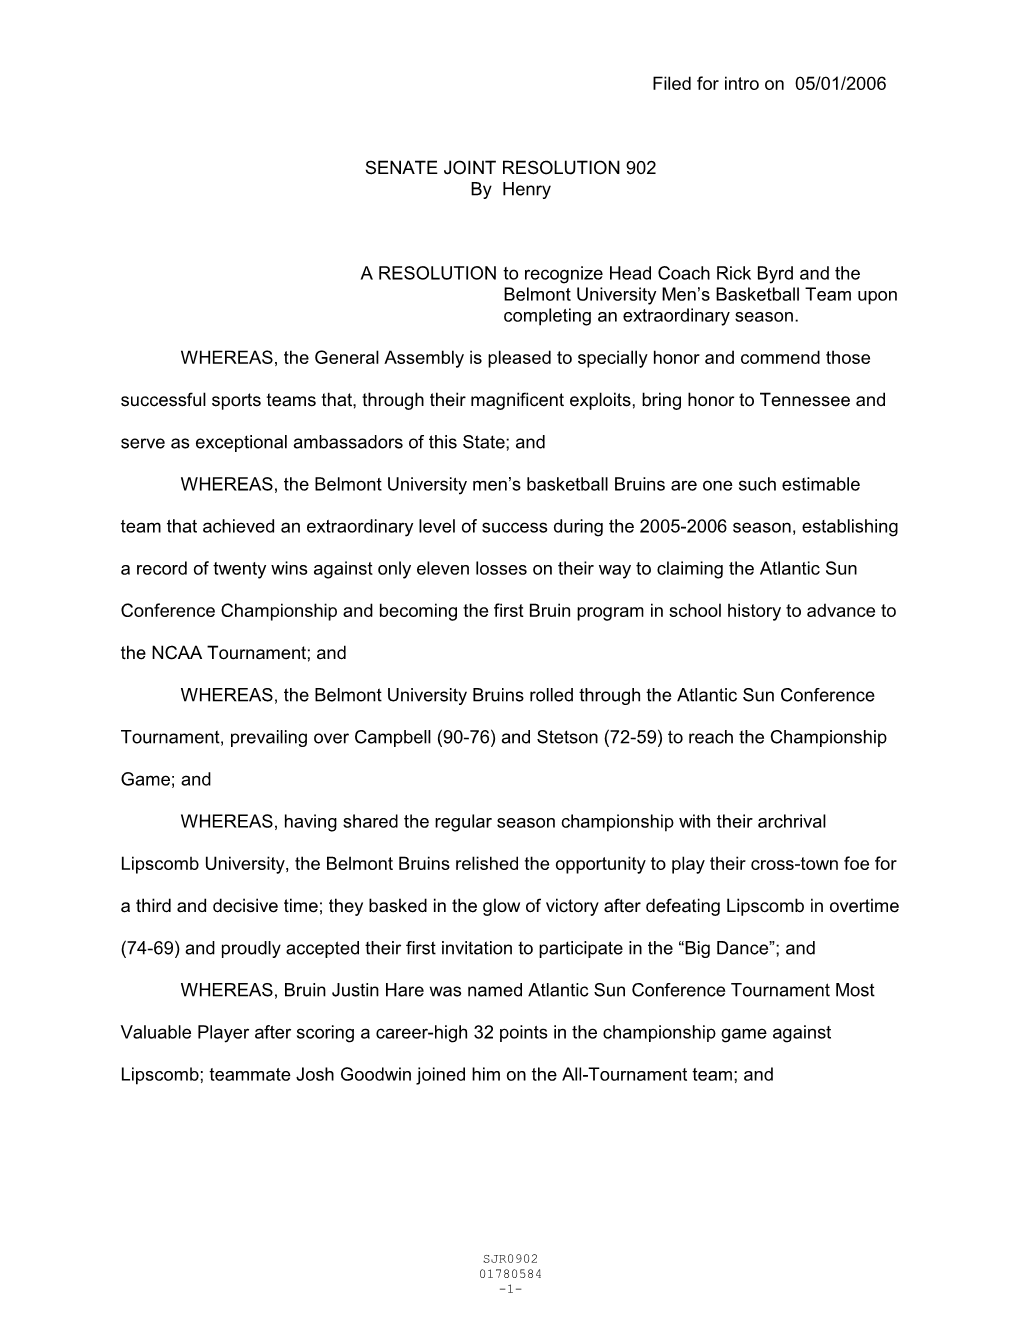 Filed for Intro on 05/01/2006 SENATE JOINT RESOLUTION 902 by Henry